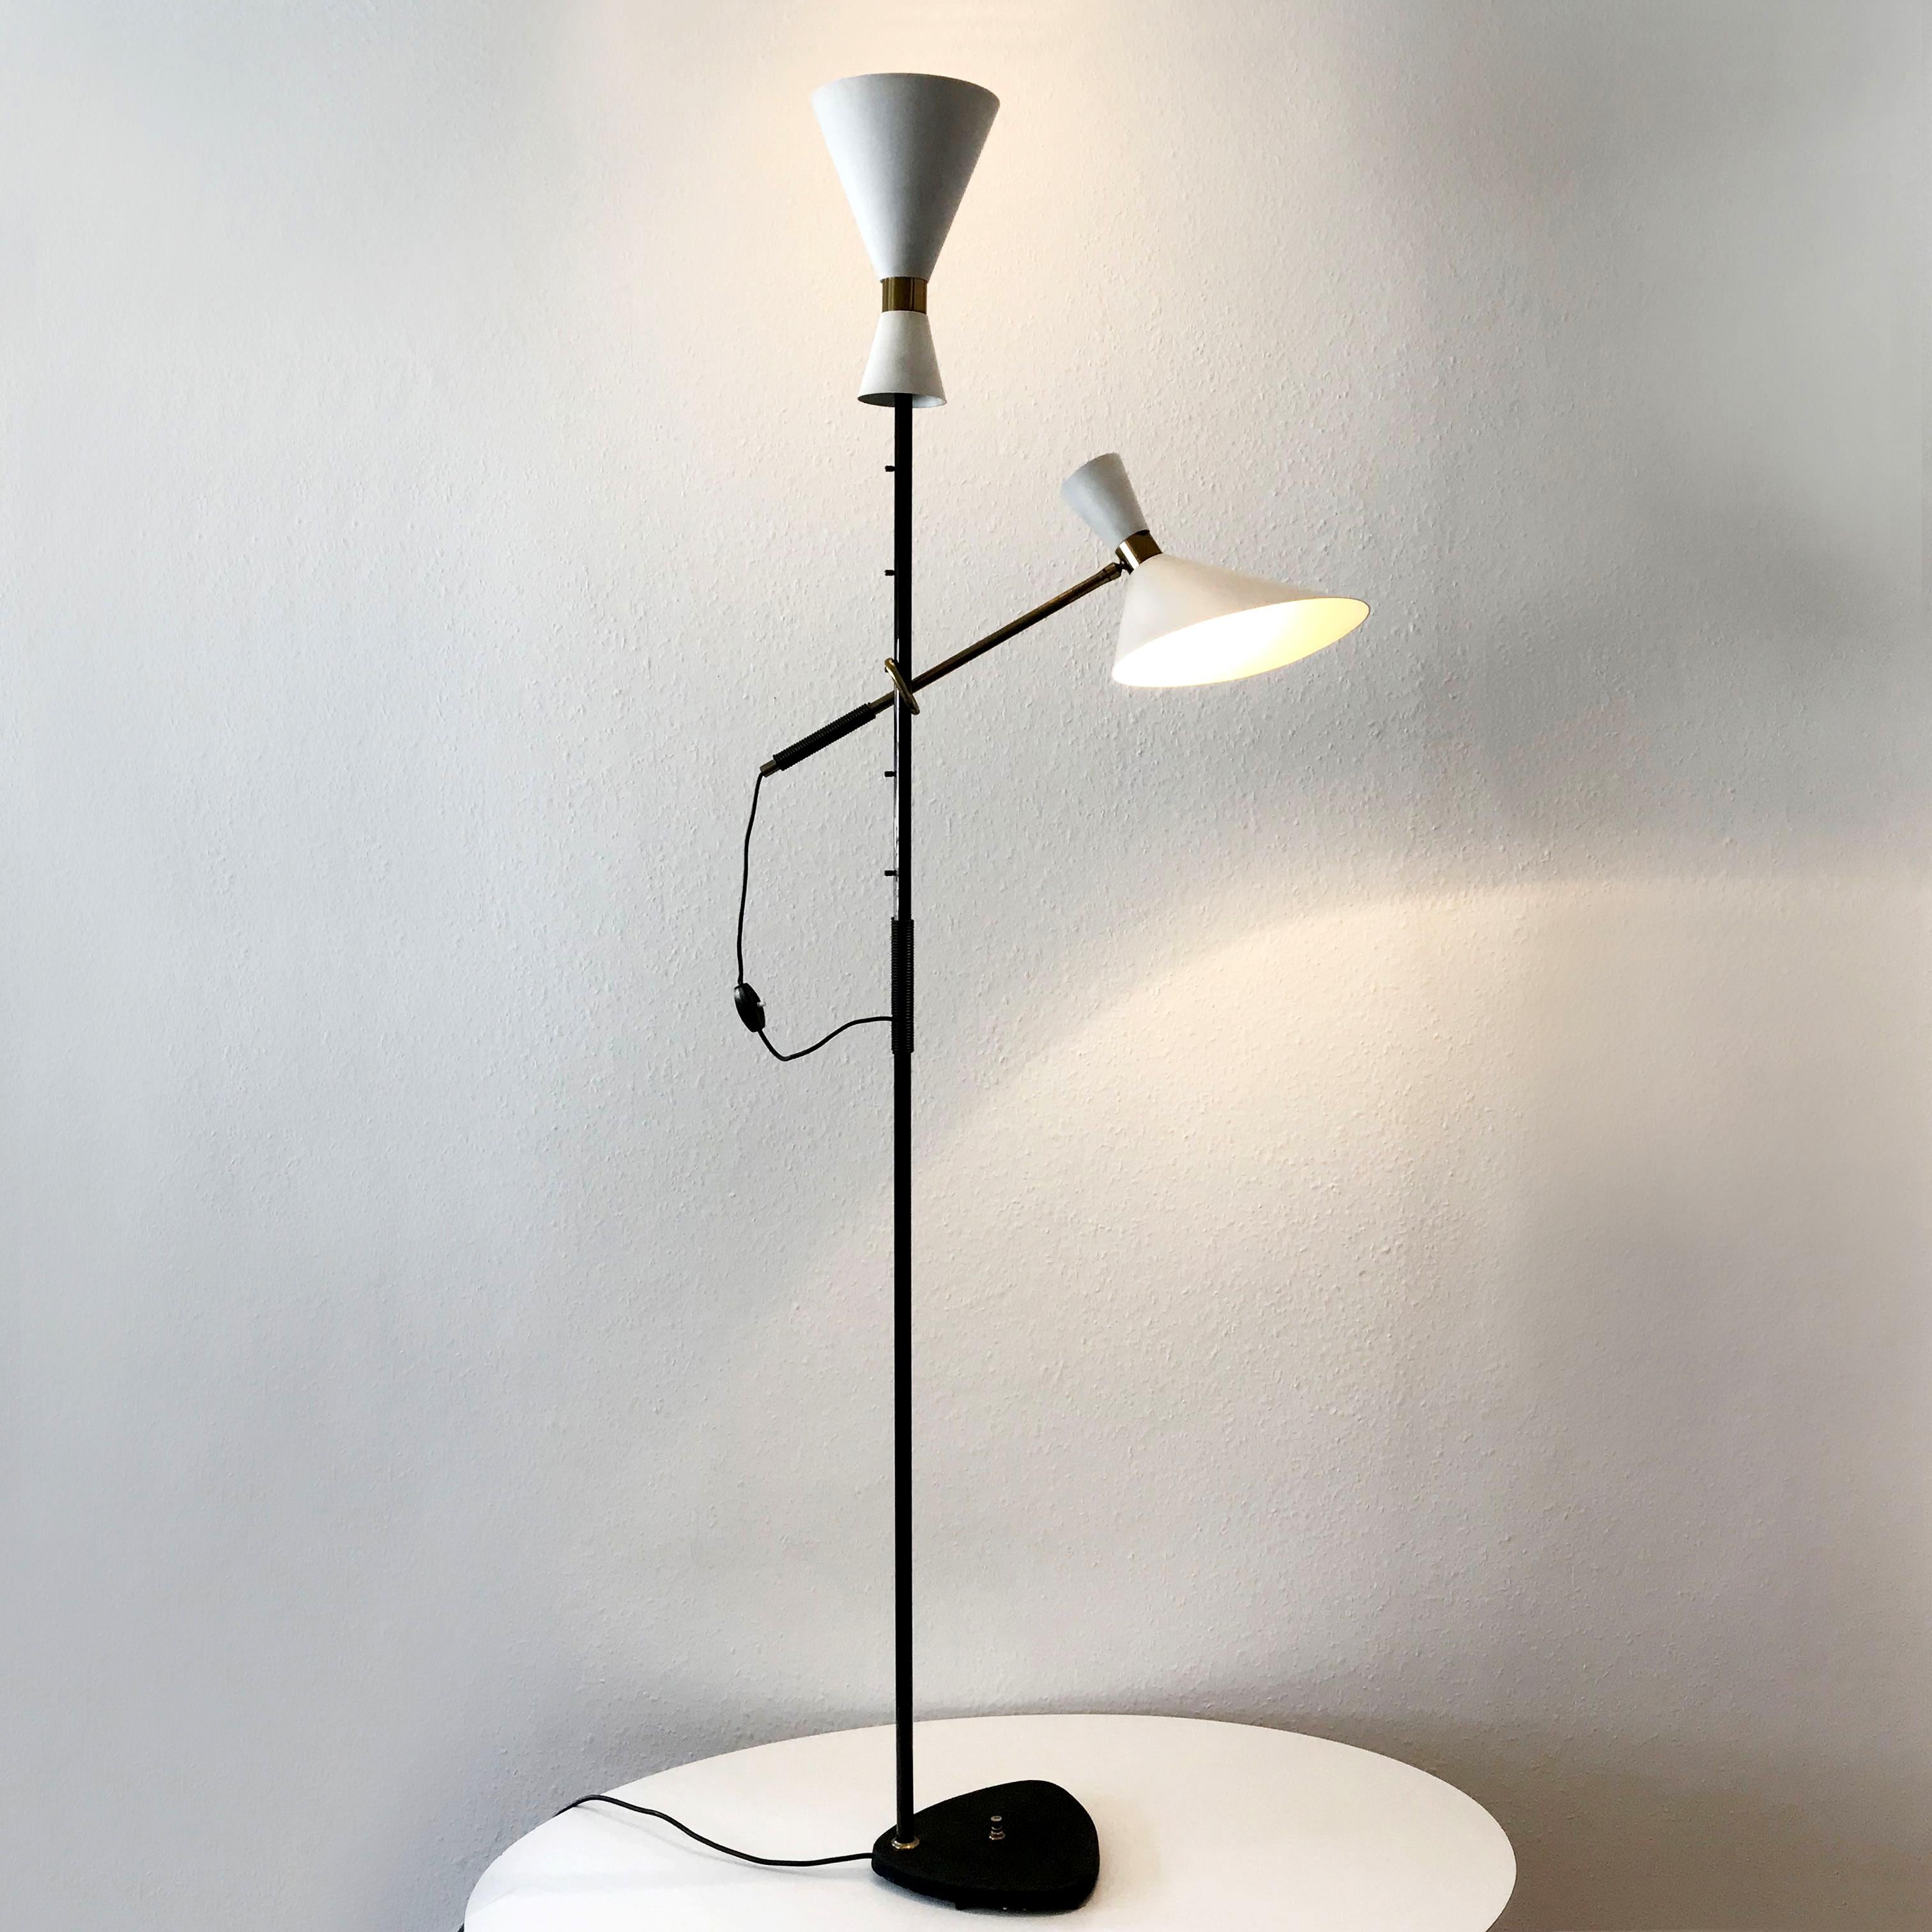 Extremely rare and elegant Mid-Century Modern floor lamp. Model Pelikan, two flamed and one arm and shade adjustable. Designed by Julius Theodor and manufactured by J.T. Kalmar, Vienna, Austria, 1950s.

Executed in brass, aluminium, steel and cast